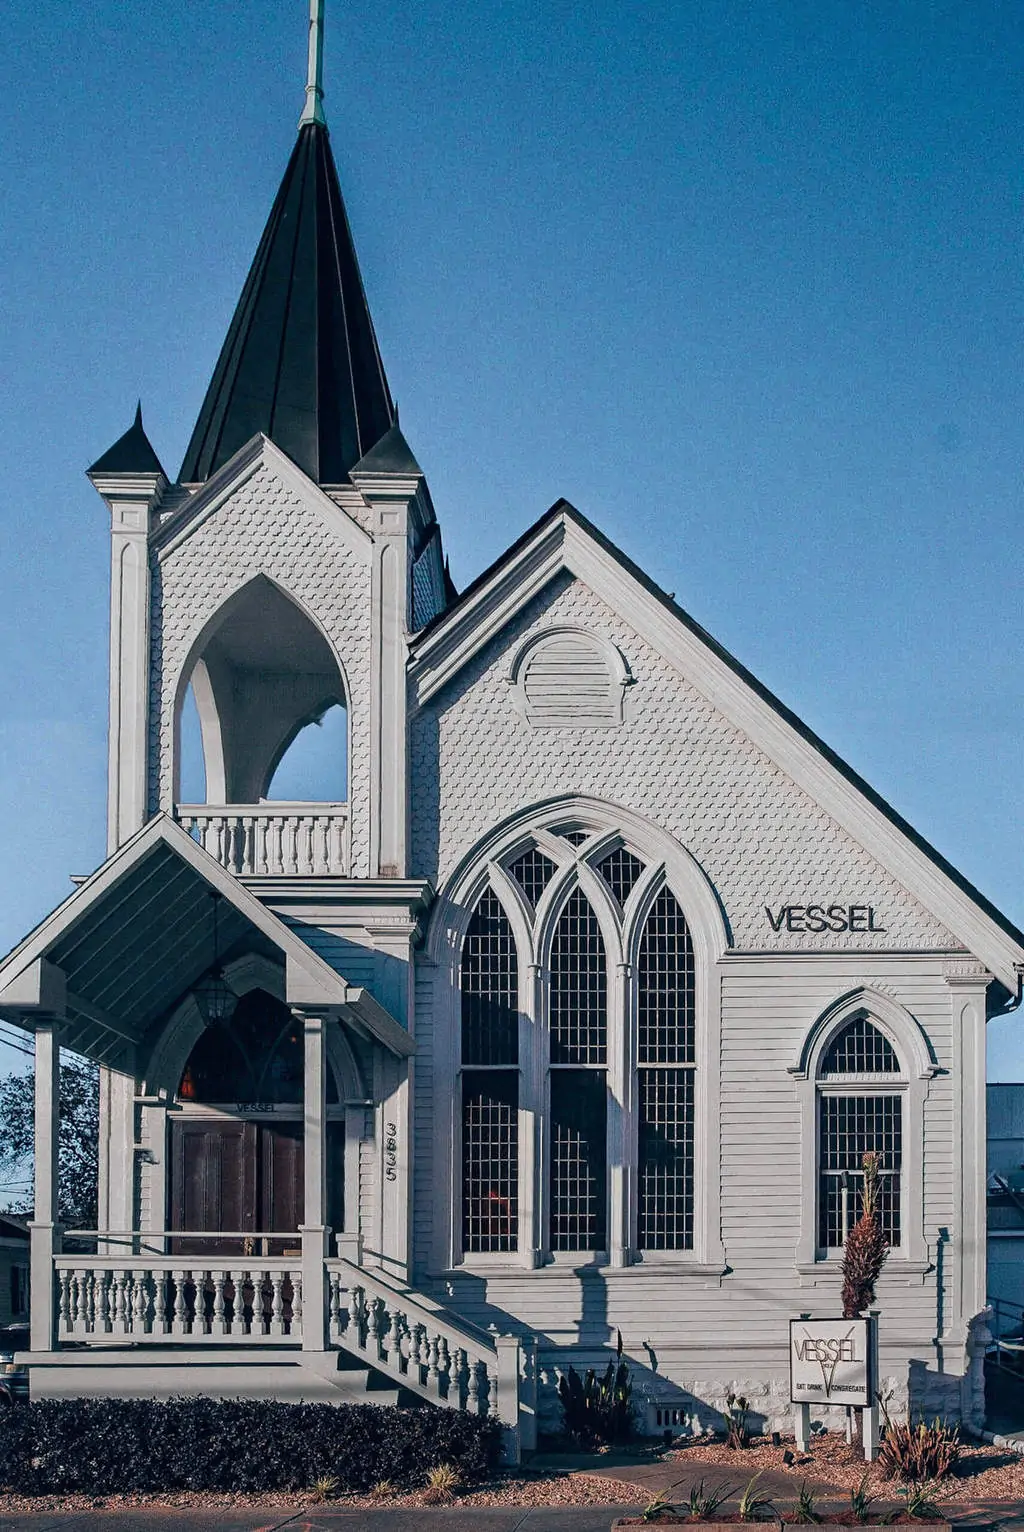 Vessel NOLA is a restaurant in New Orleans in a converted church